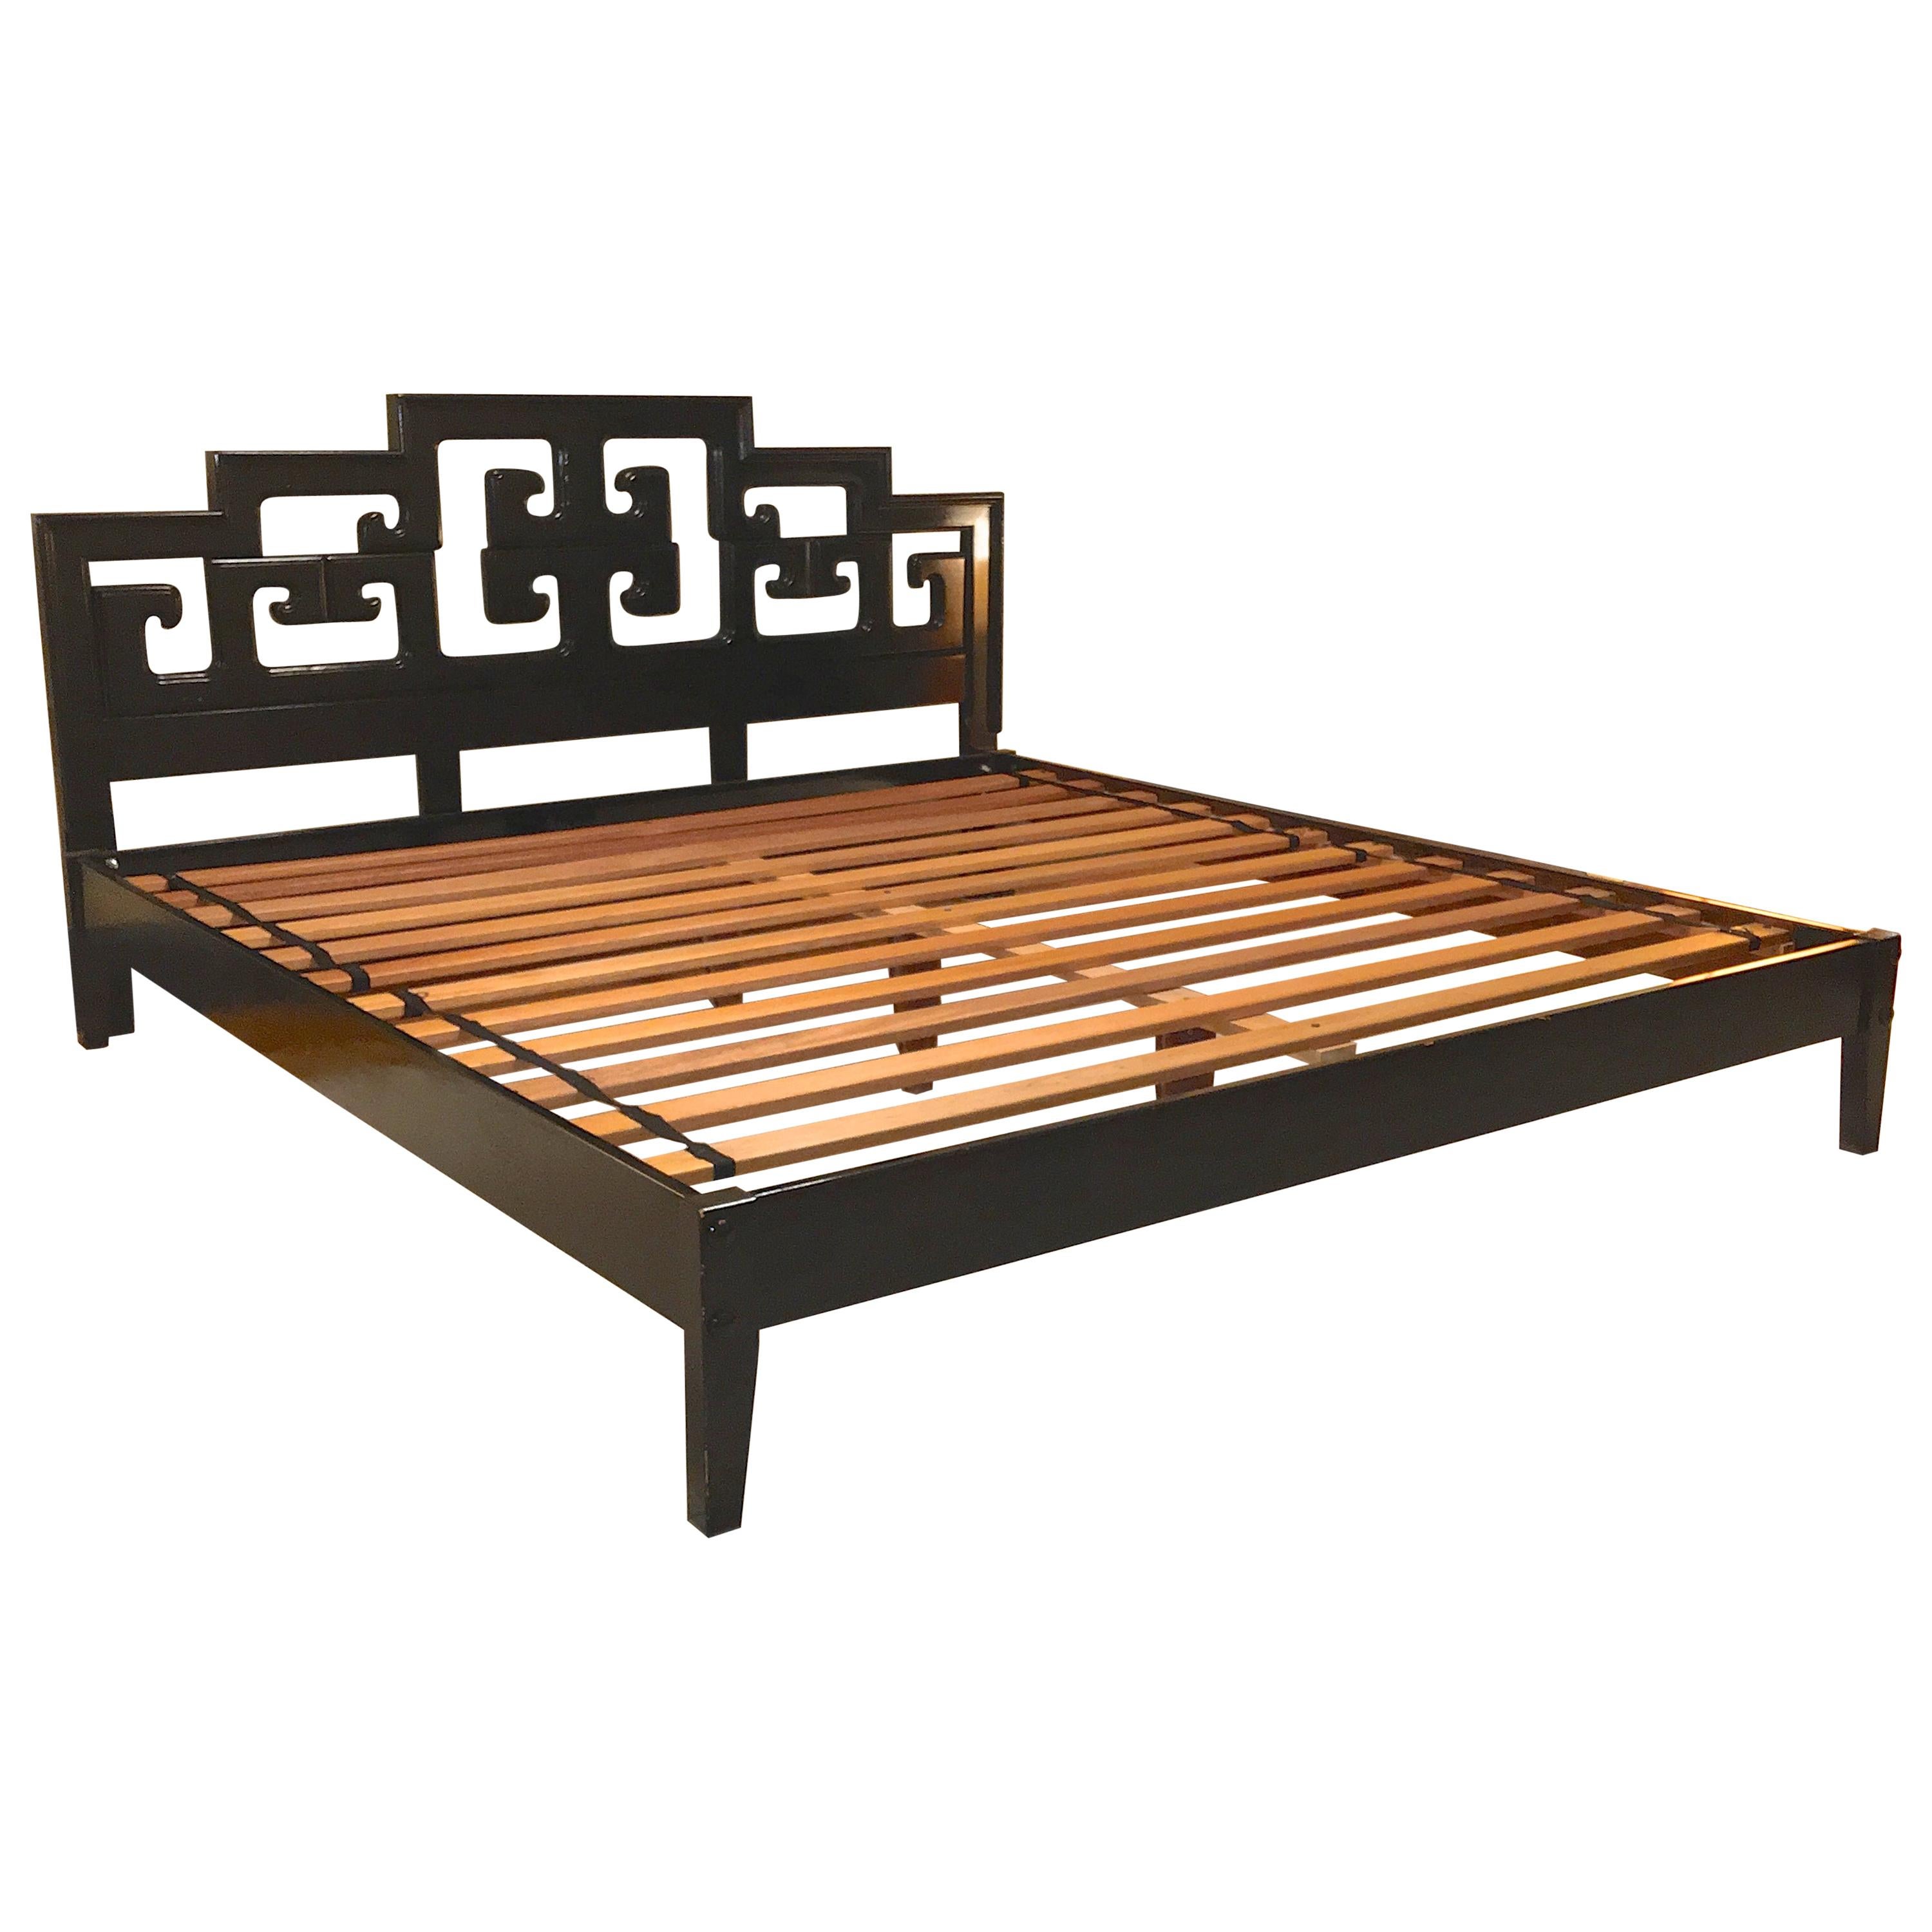 Hollywood Regency King-Size Platform Bed and Headboard by Century